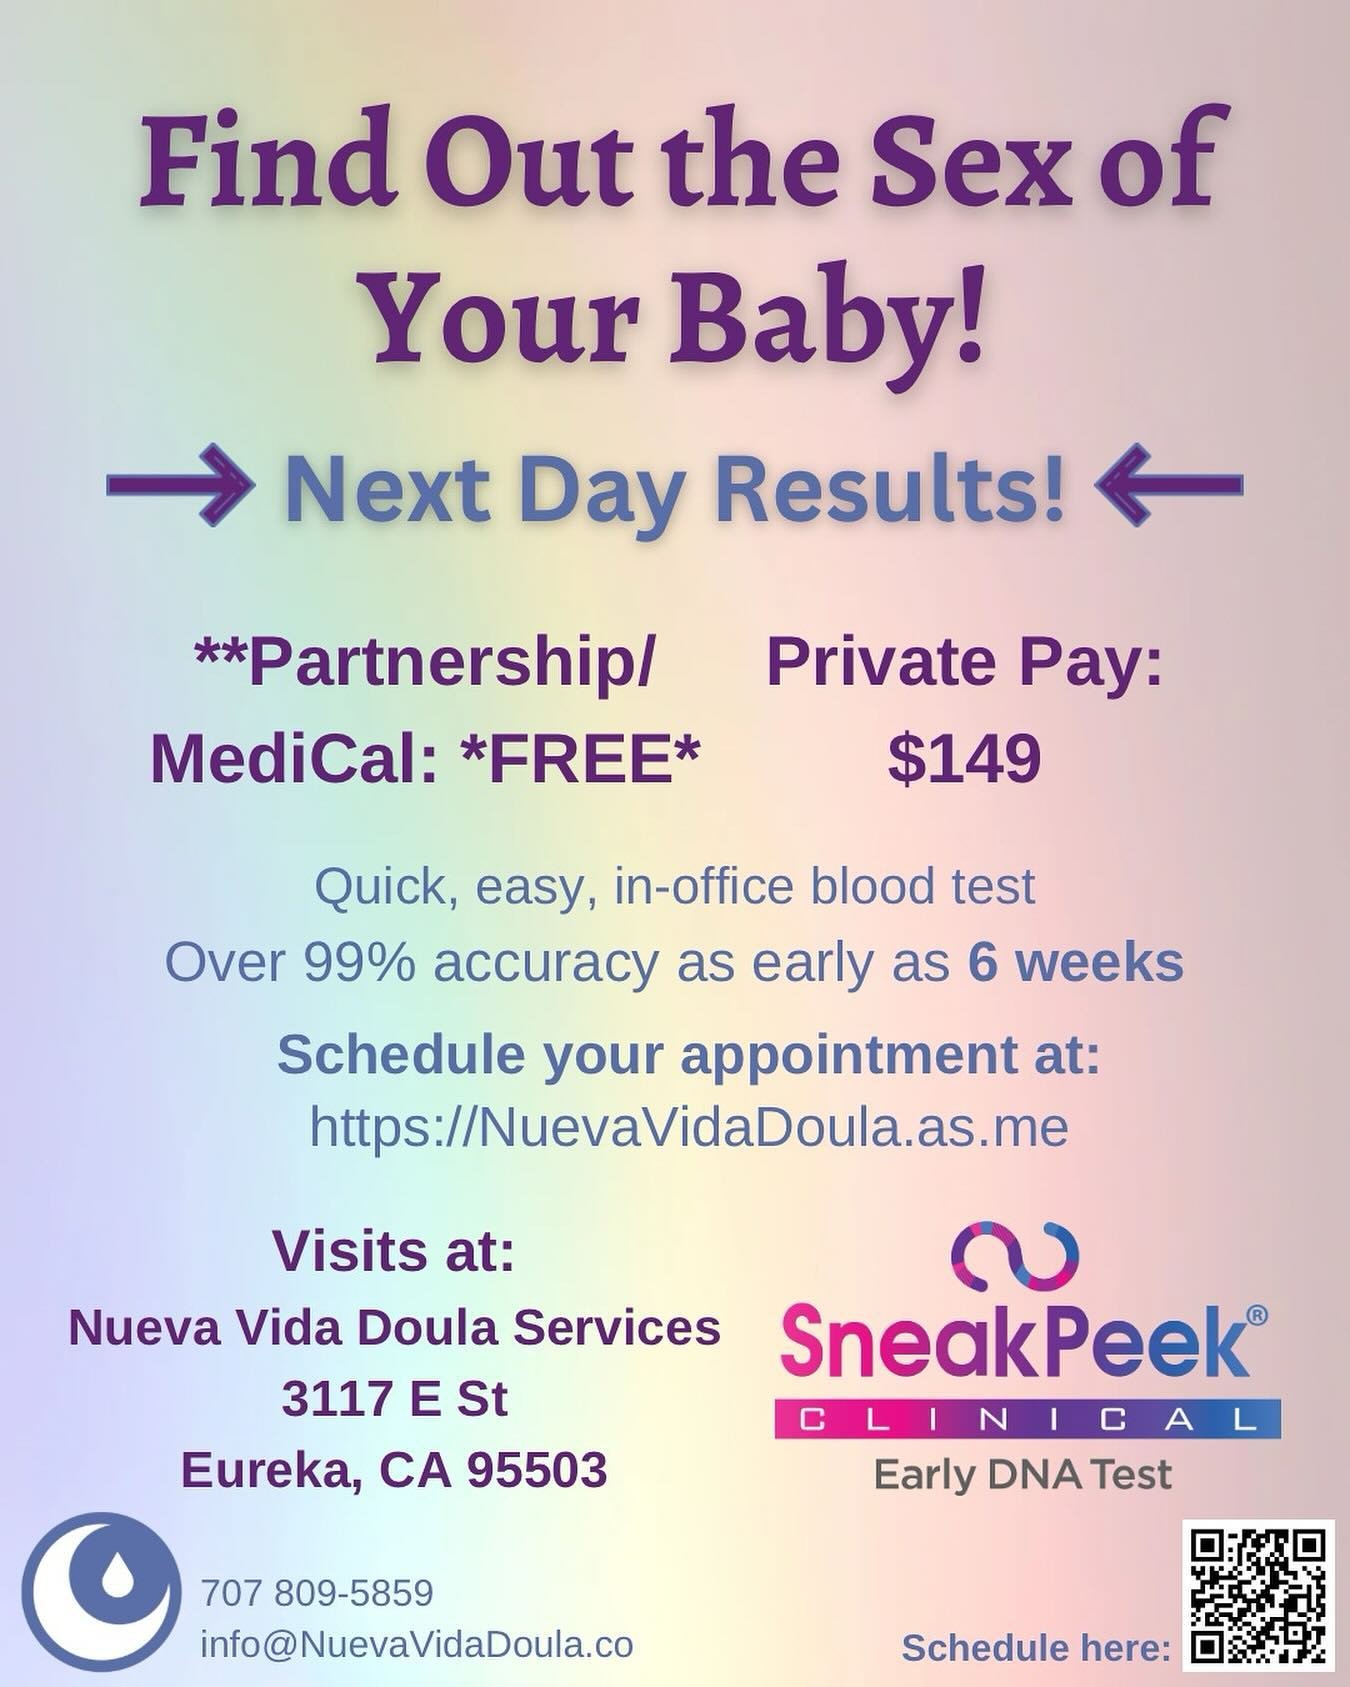 Nueva Vida Doula is excited to partner with @sneakpeektest to offer in-office testing to find out the sex of your baby as early as 6 weeks! 
This is a *free* service for those with Partnership/Medi-cal!
For private pay, this service is a low rate of 